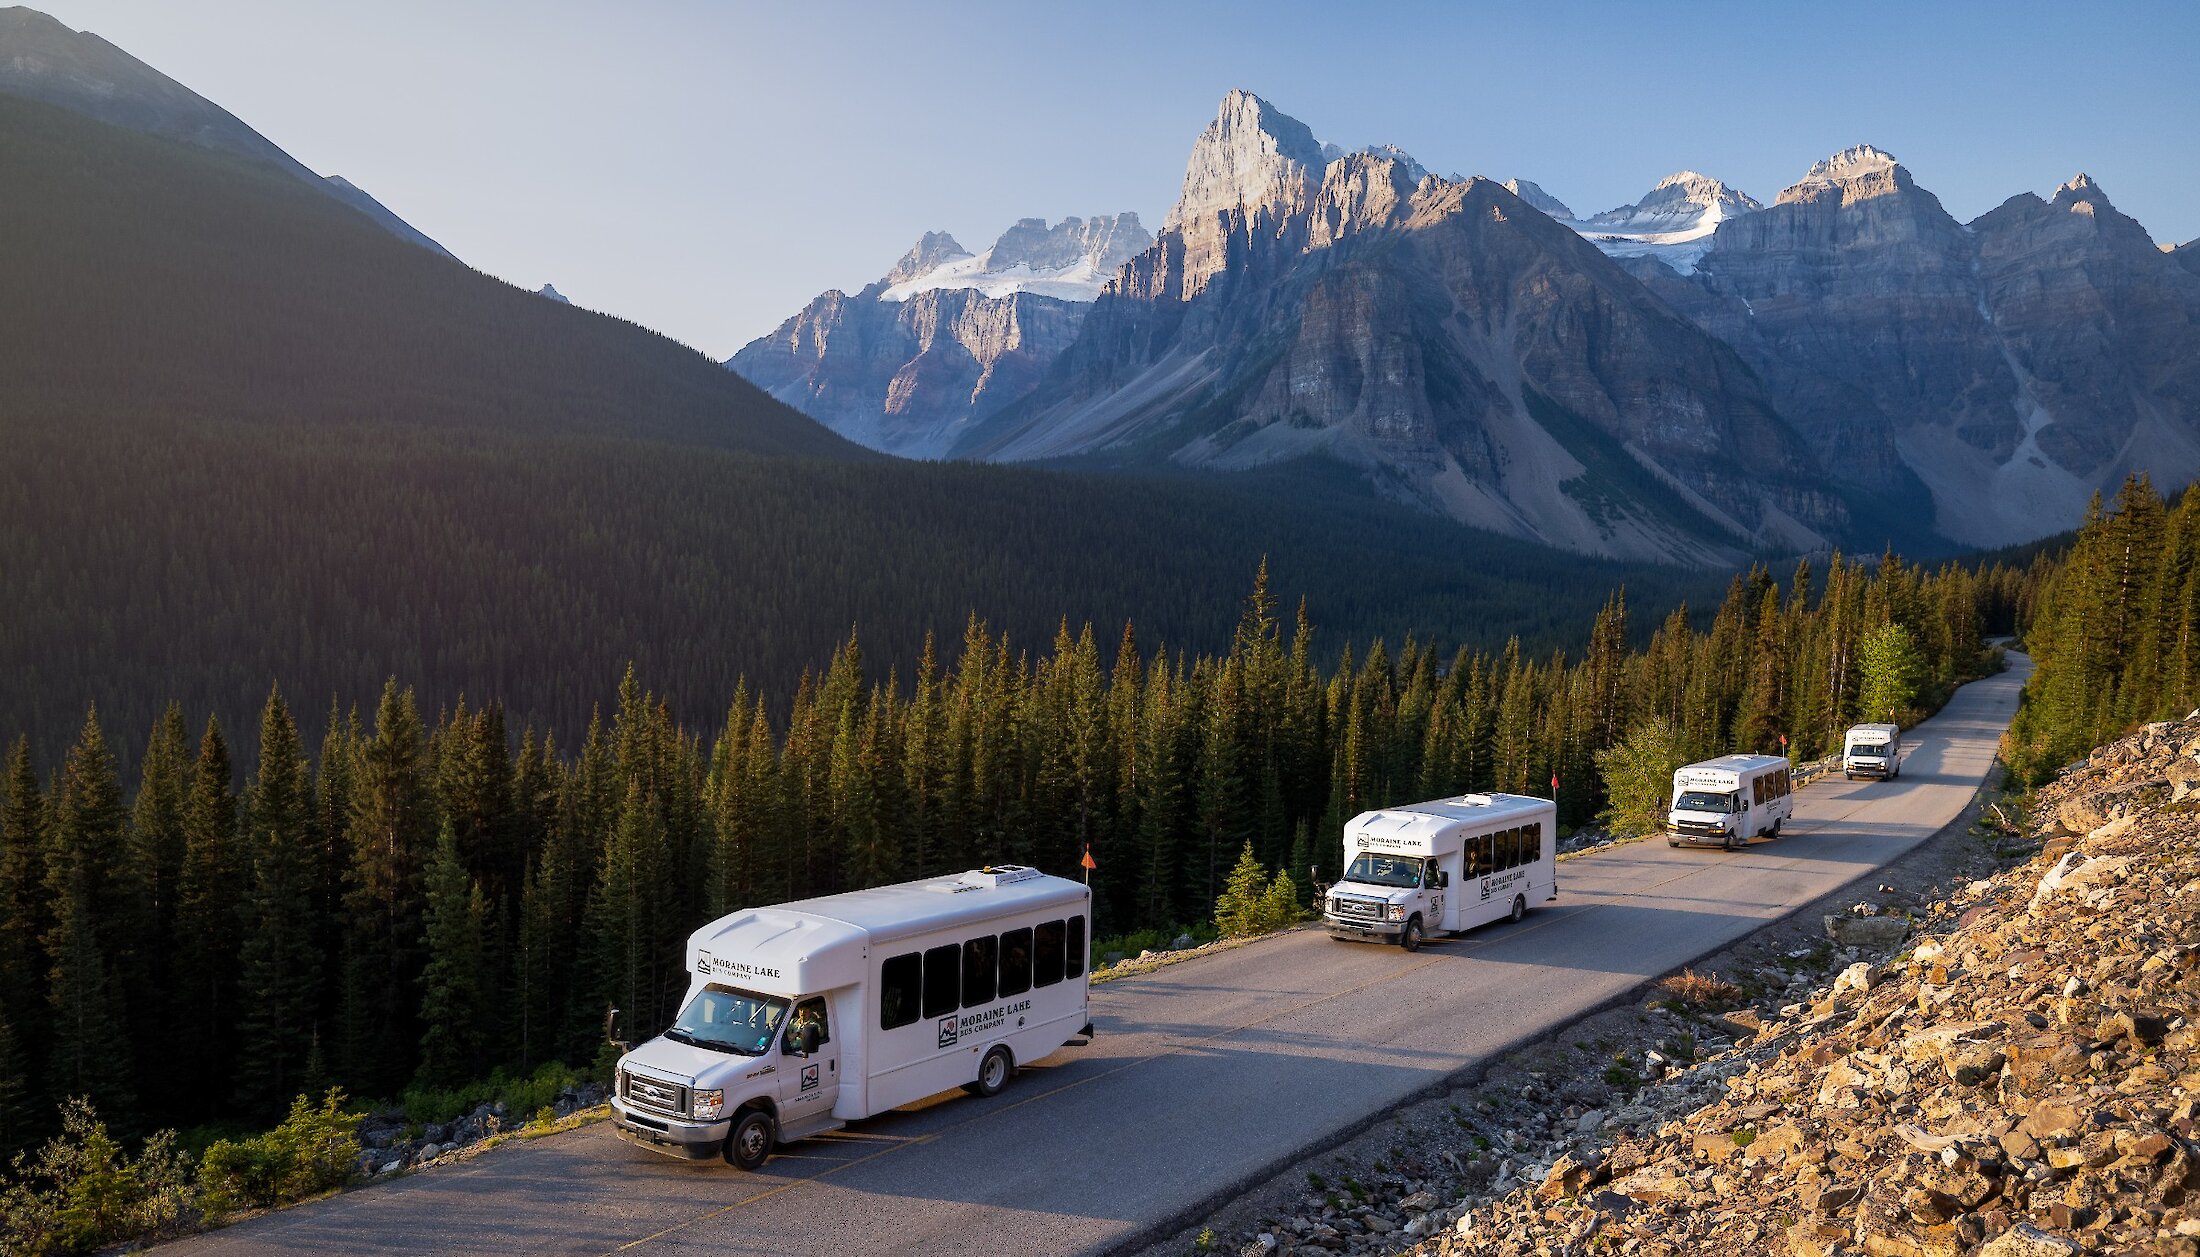 A convoy of Moraine Lake shuttle bus driving the lake road with picturesque mountain views